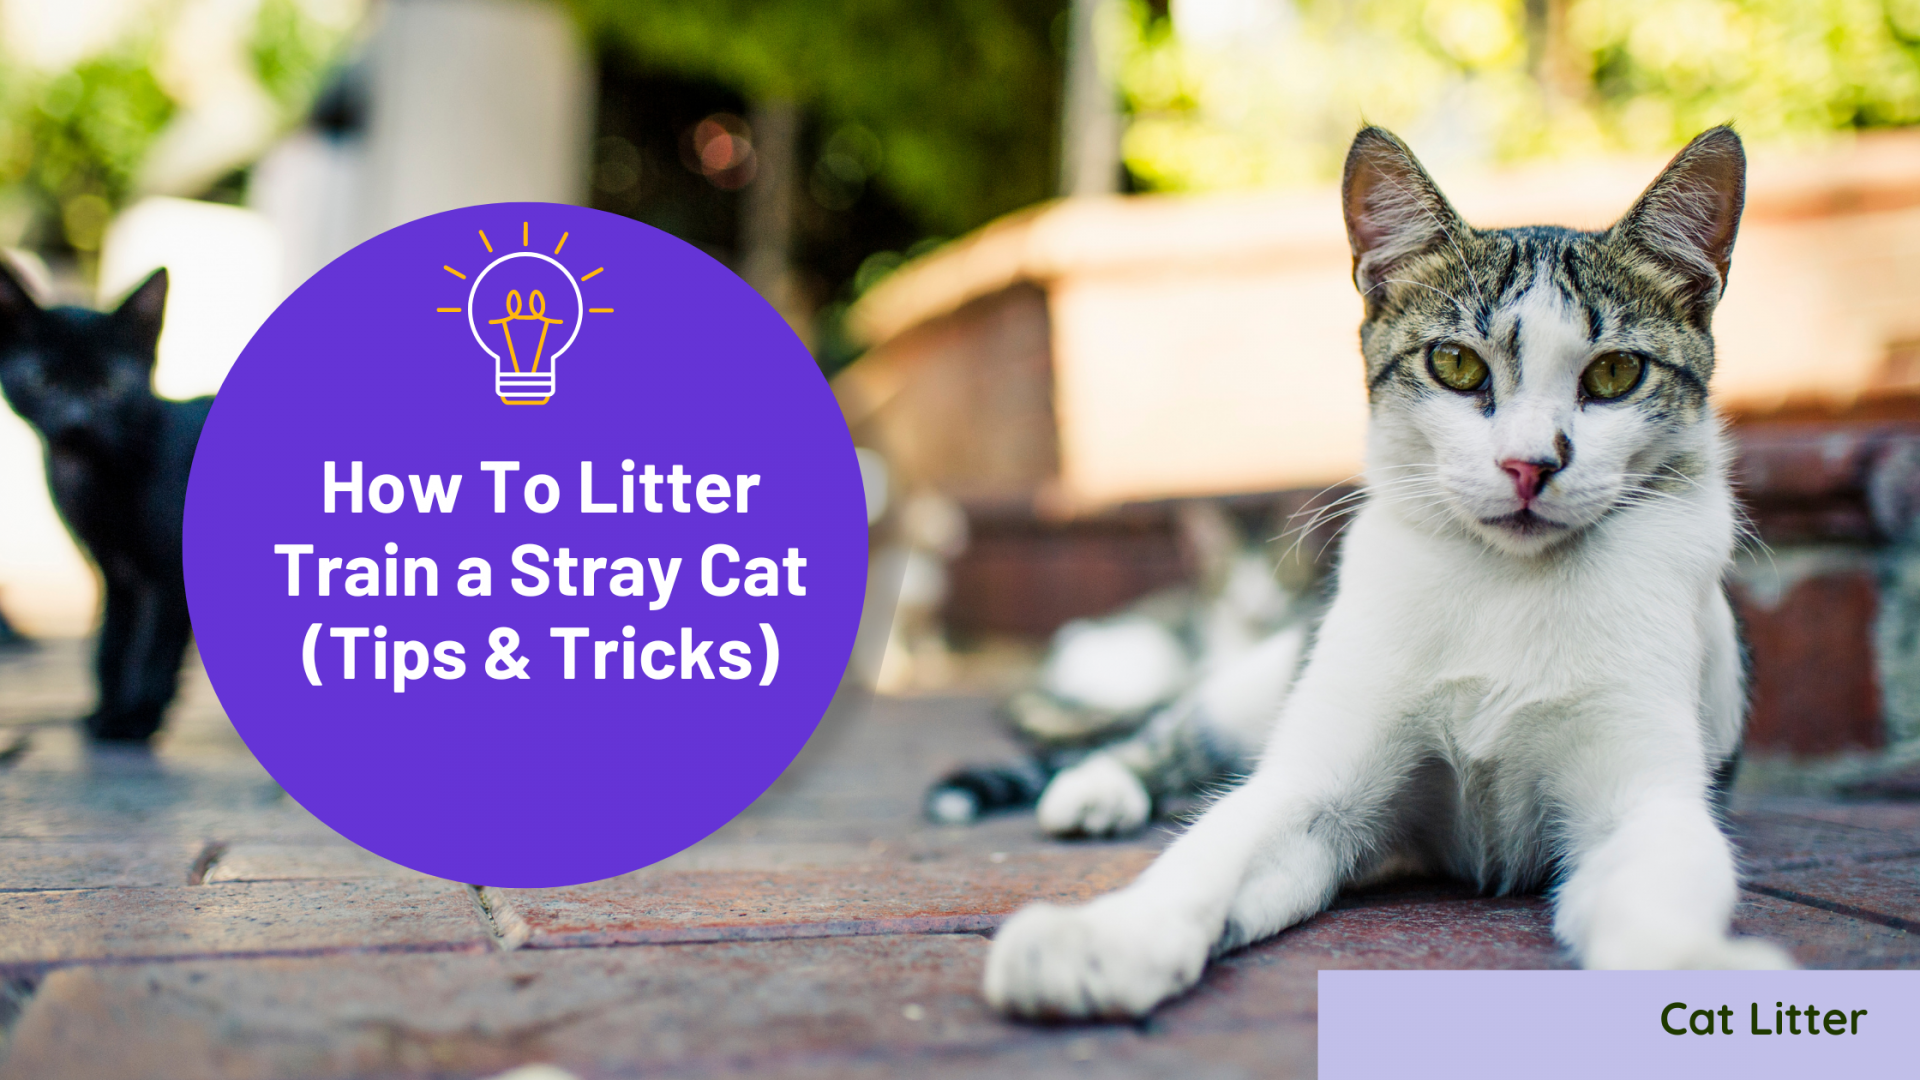 How To Litter Train a Stray Cat (Tips & Tricks)